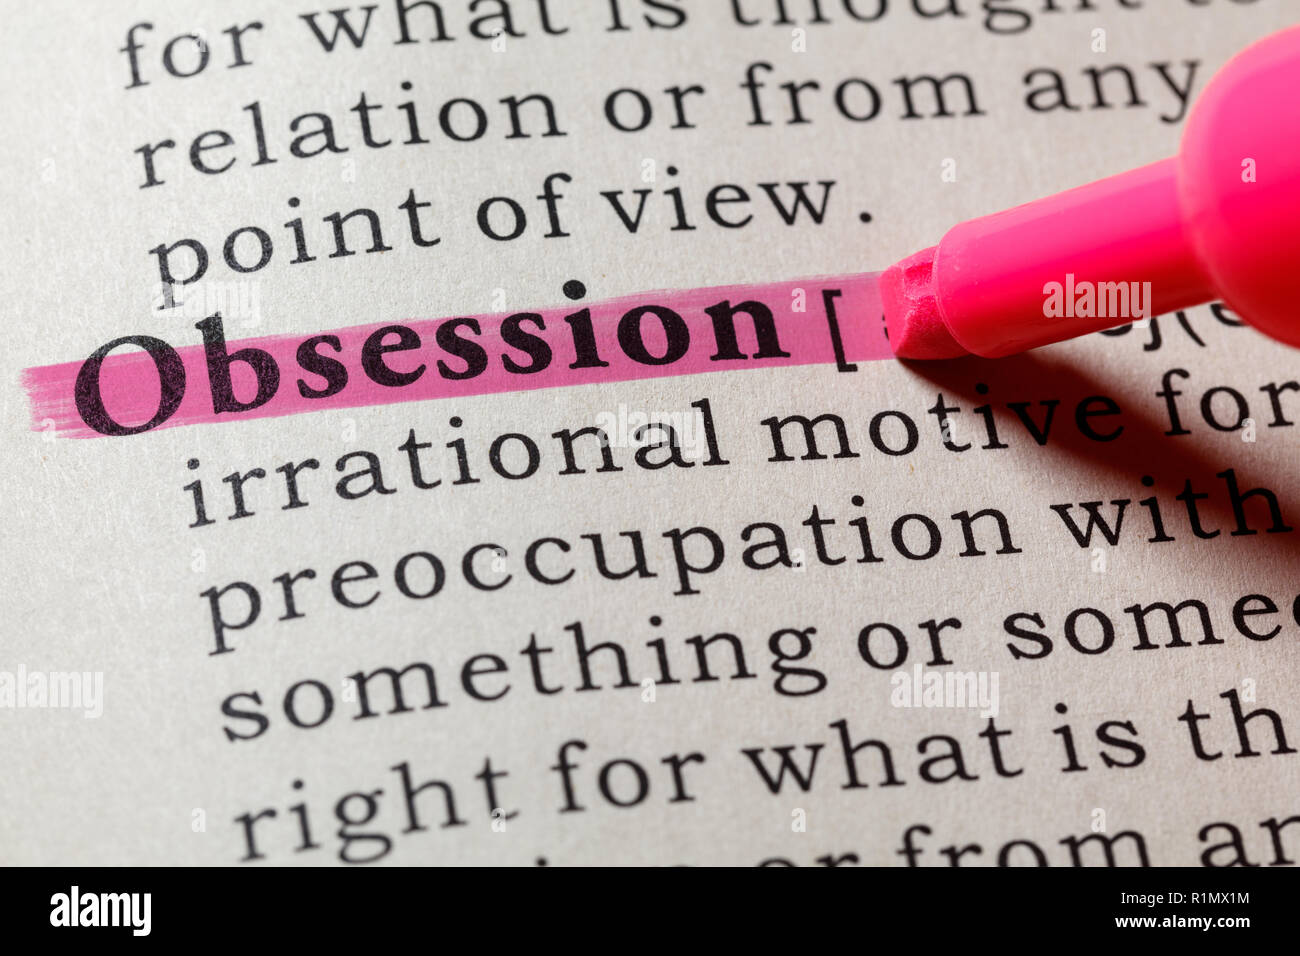 Fake Dictionary, Dictionary definition of the word obsession . including key descriptive words. Stock Photo